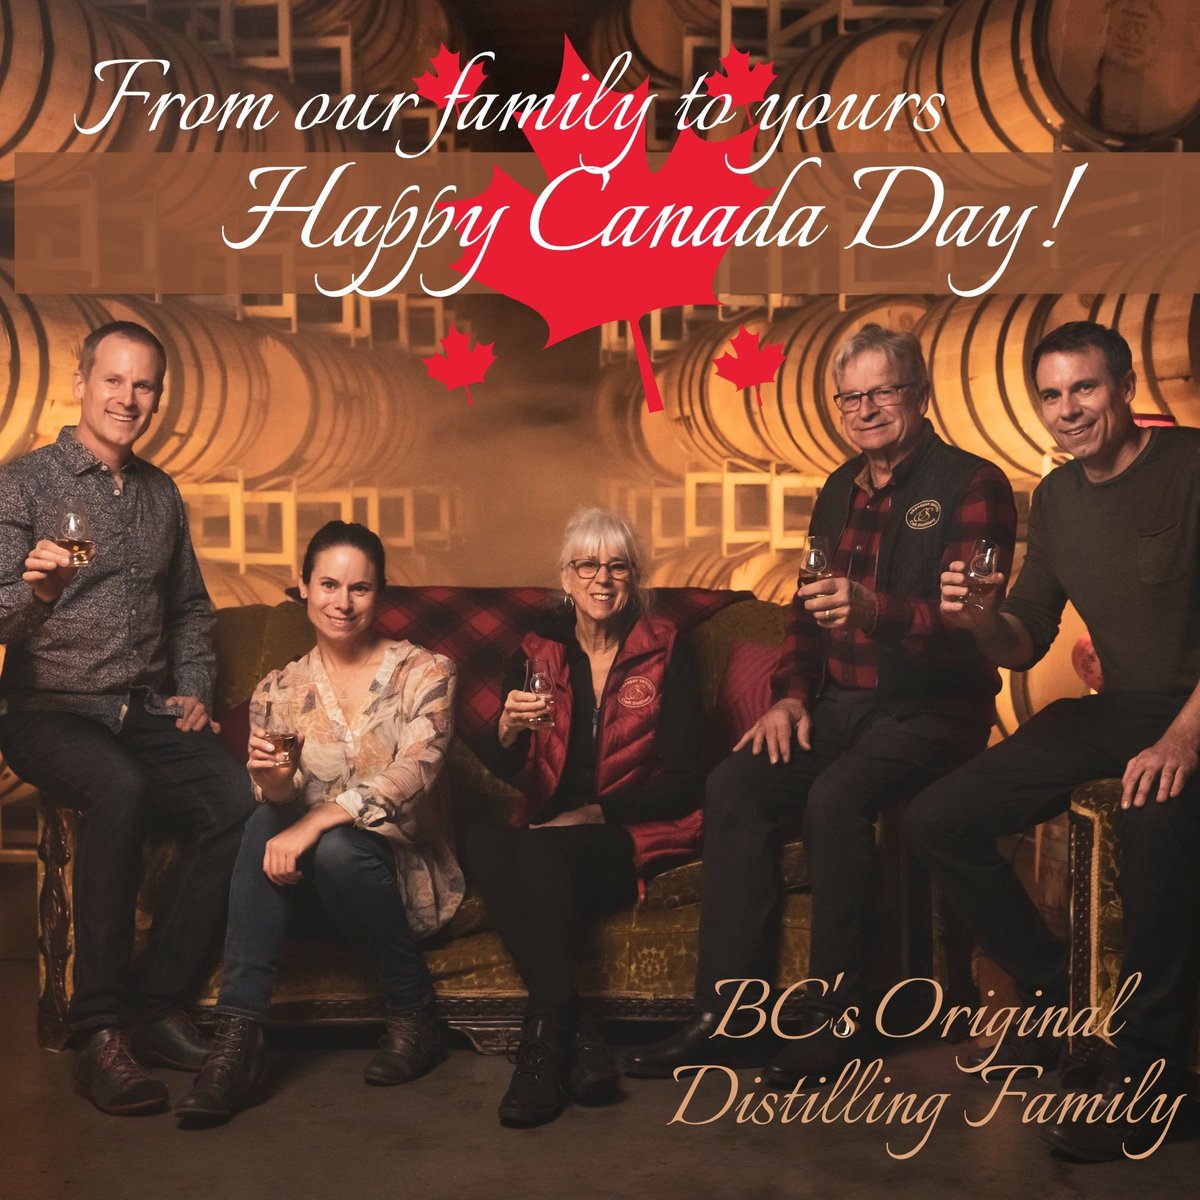 From our family to yours, let's raise a glass to a happy Canada Day! 🍁 . #HappyCanadaDay #OkanaganSpirits #FamilyDistillery